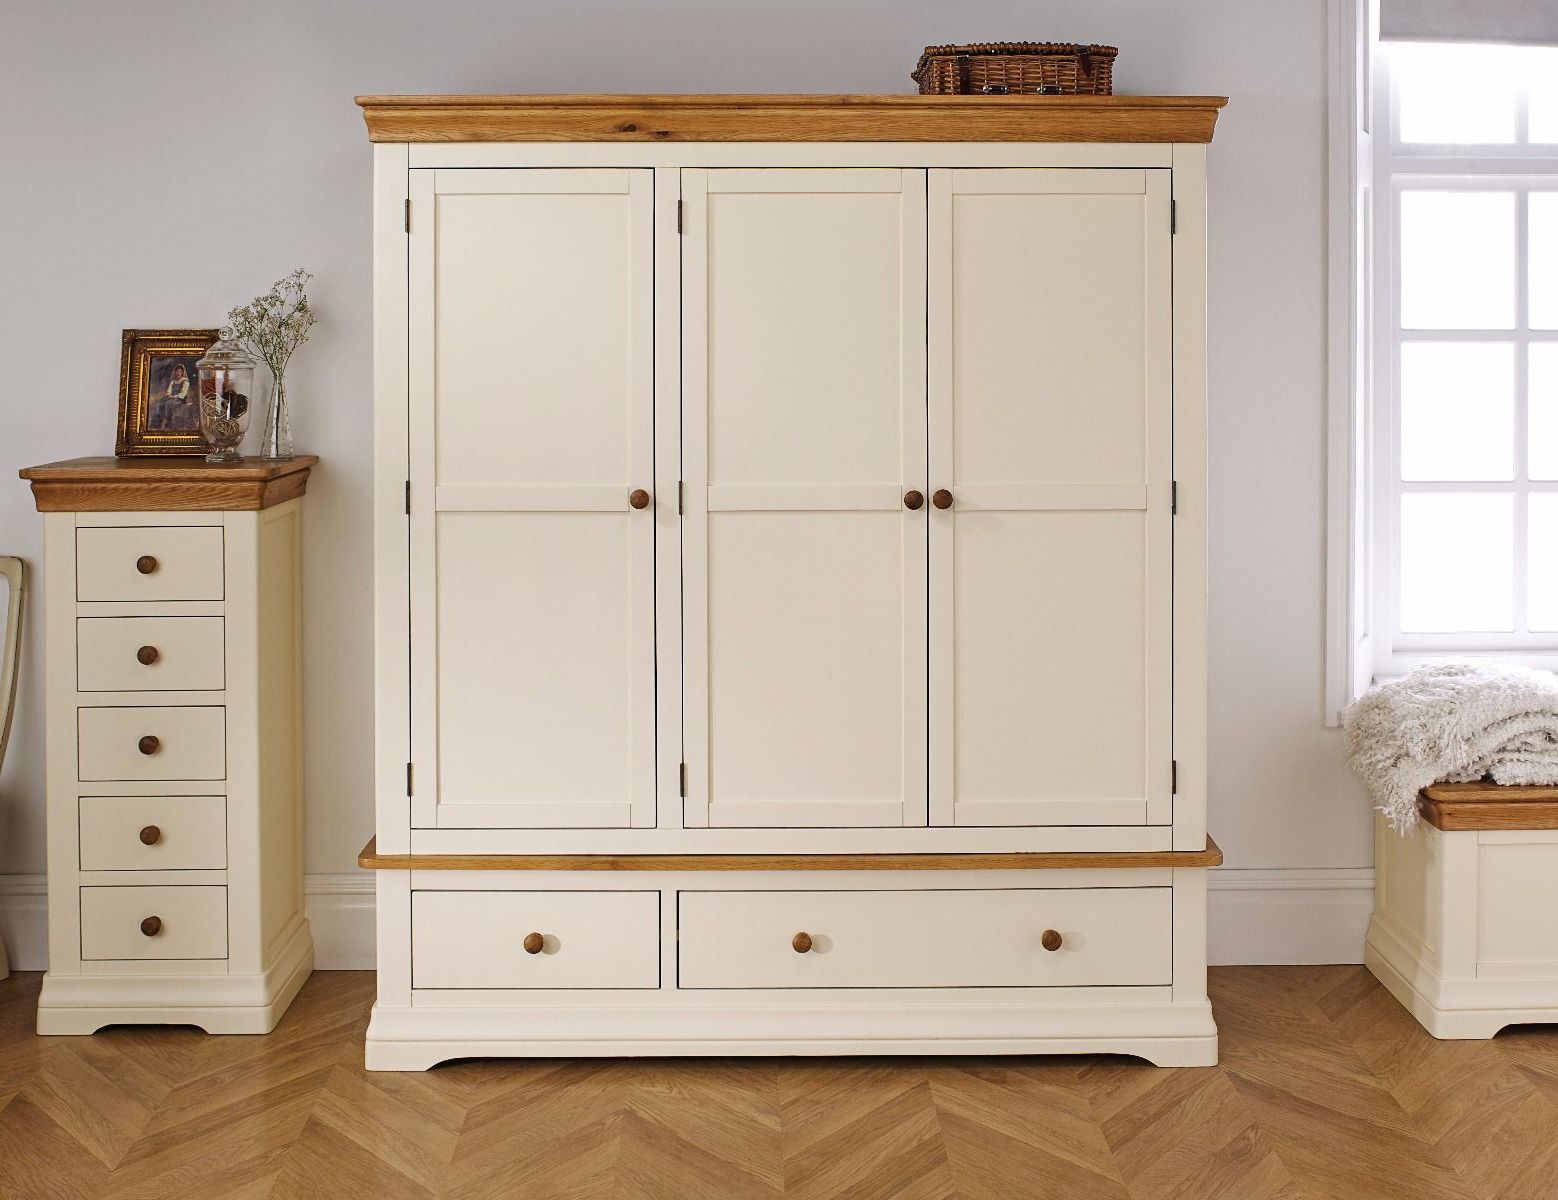 Farmhouse Cream Painted Triple Oak Wardrobe – Free Delivery | Top Furniture With Cream Triple Wardrobes (Gallery 2 of 20)